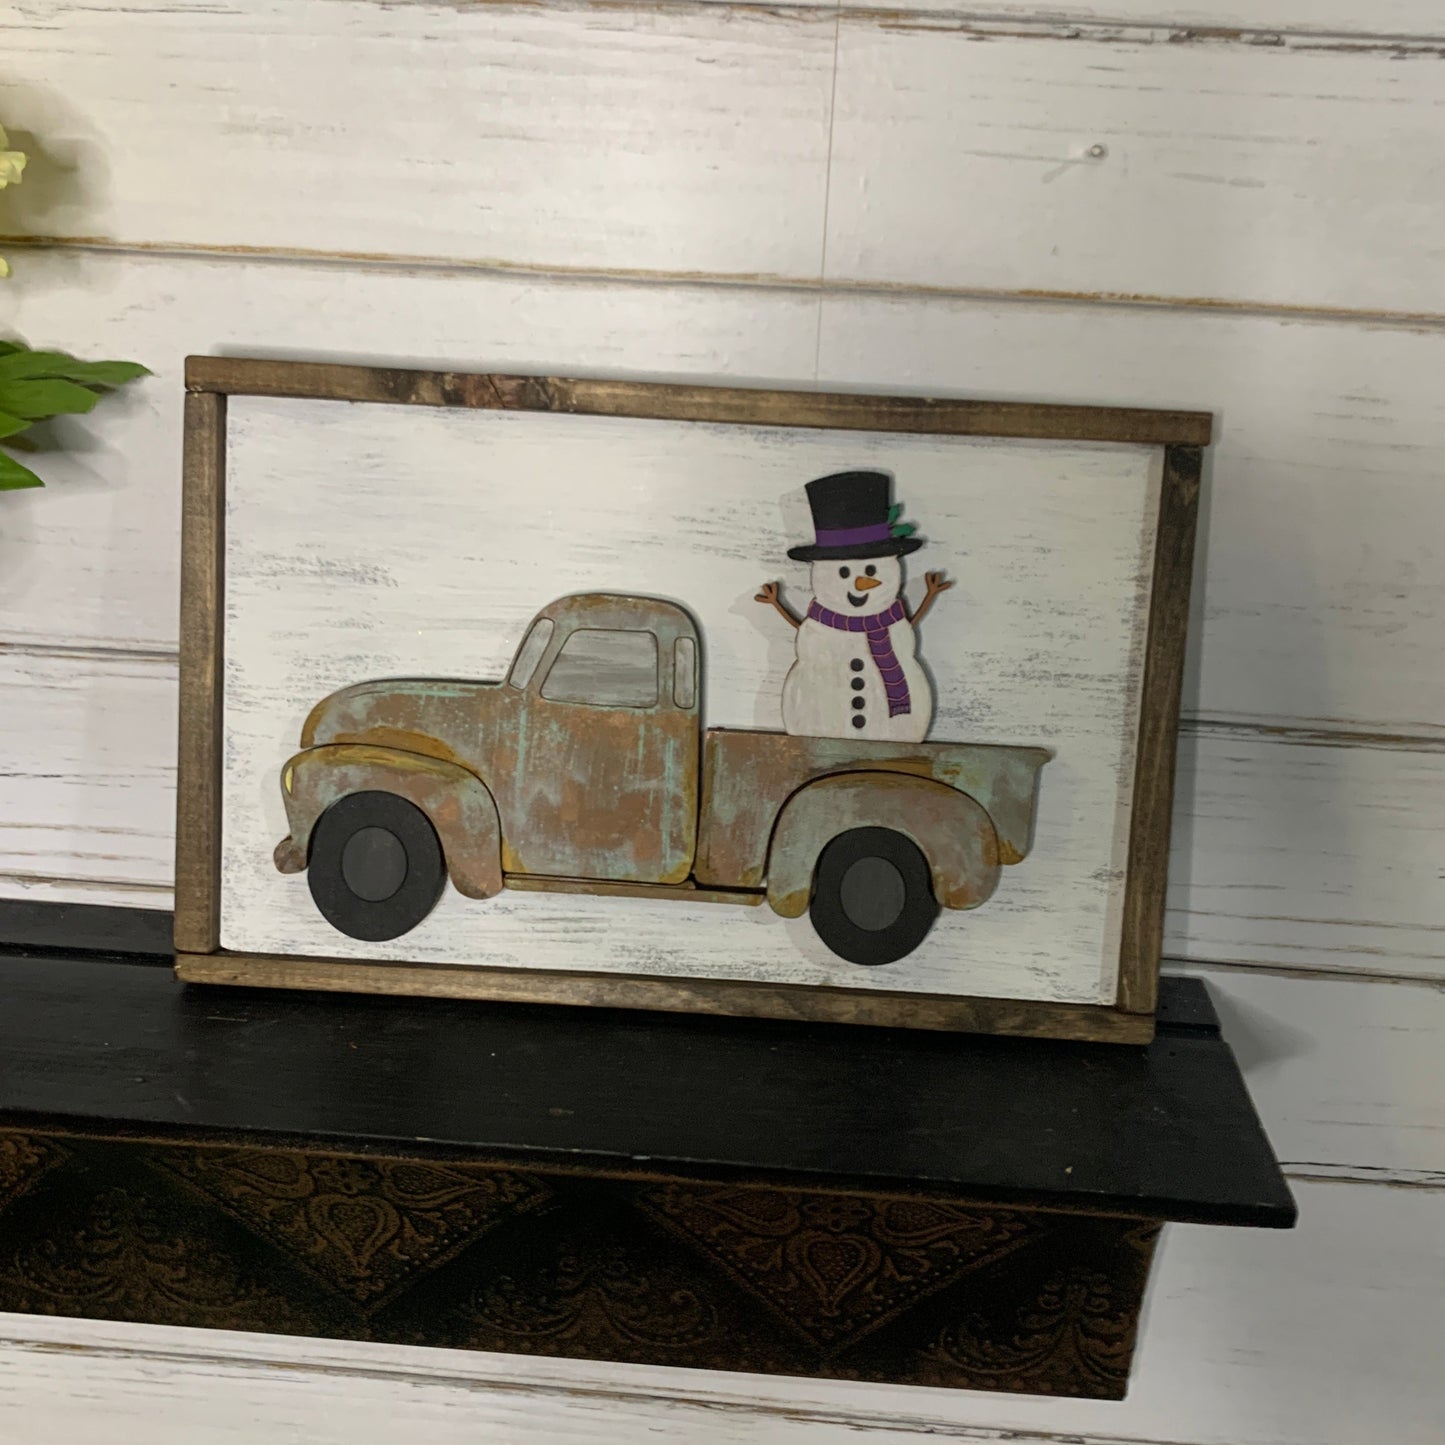 Vintage Truck - with Christmas Tree, Pumpkins, Snowman, Flag, and Flowers